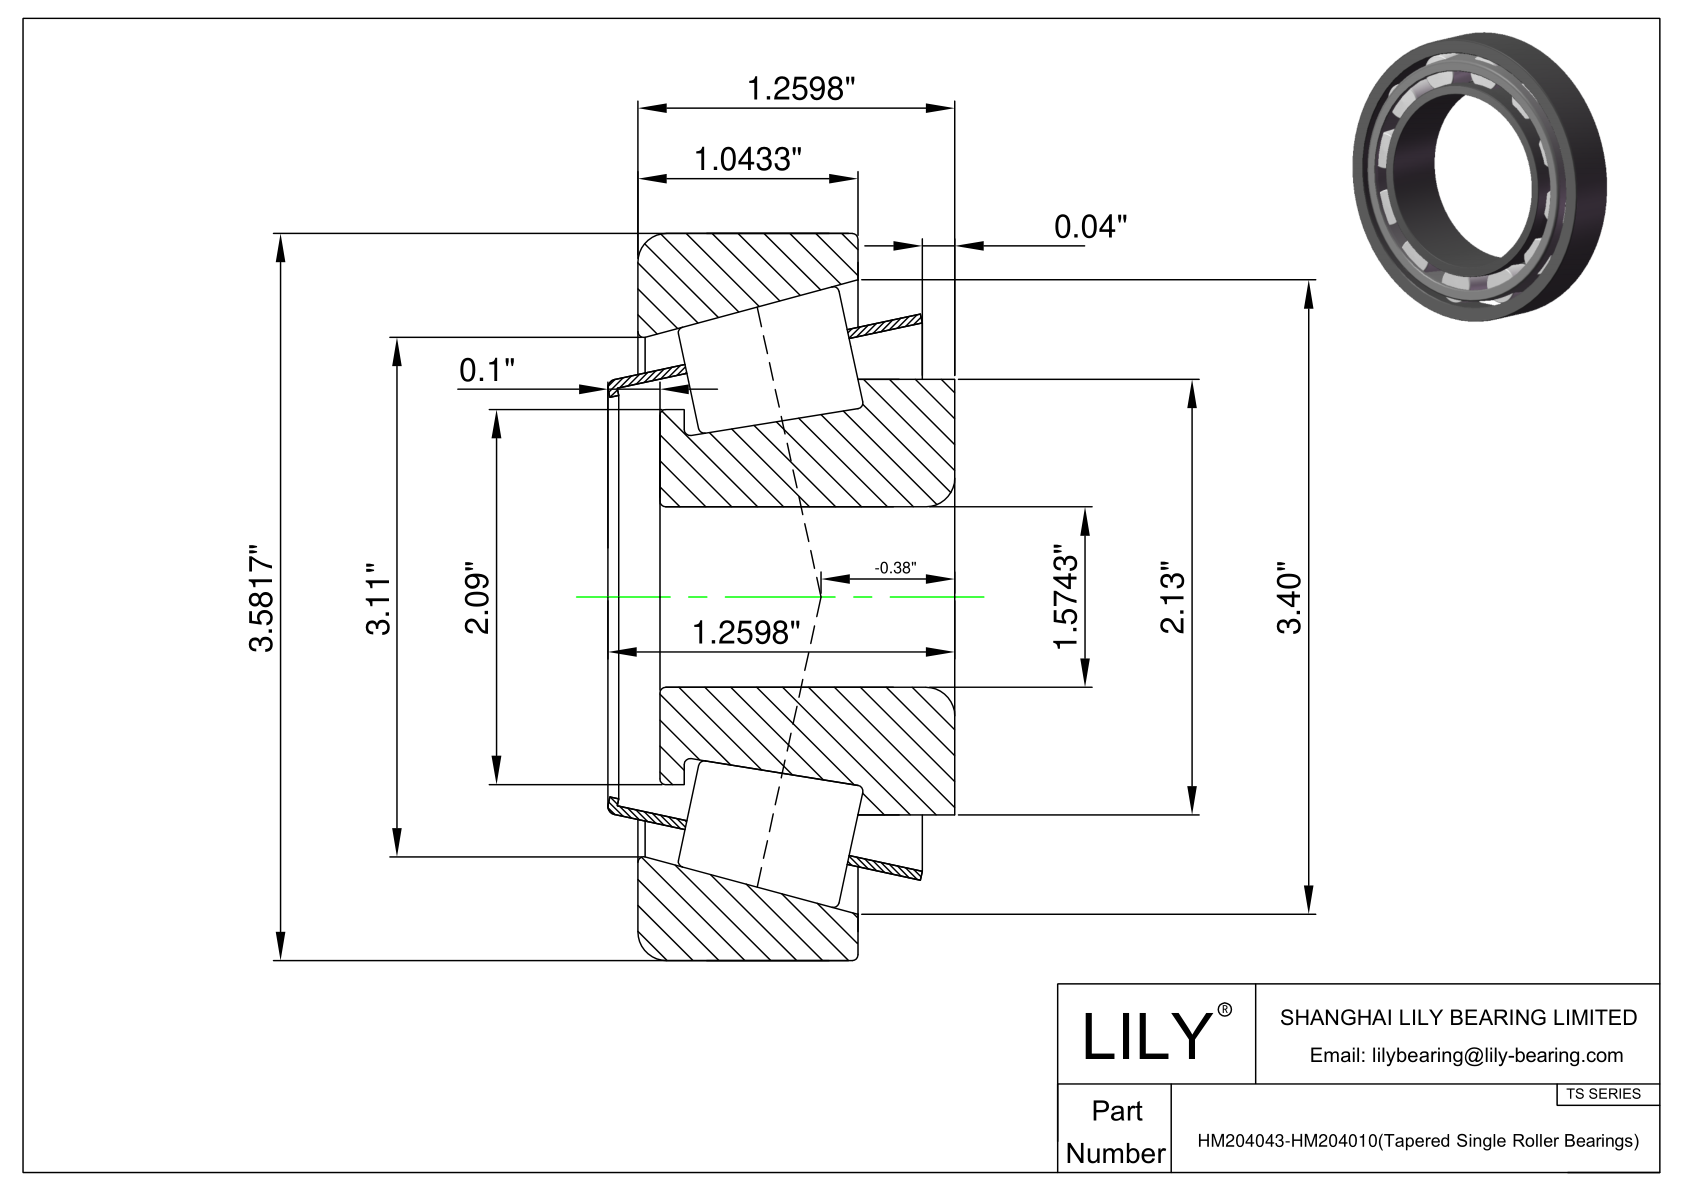 HM204043-HM204010 TS (Tapered Single Roller Bearings) (Imperial) cad drawing